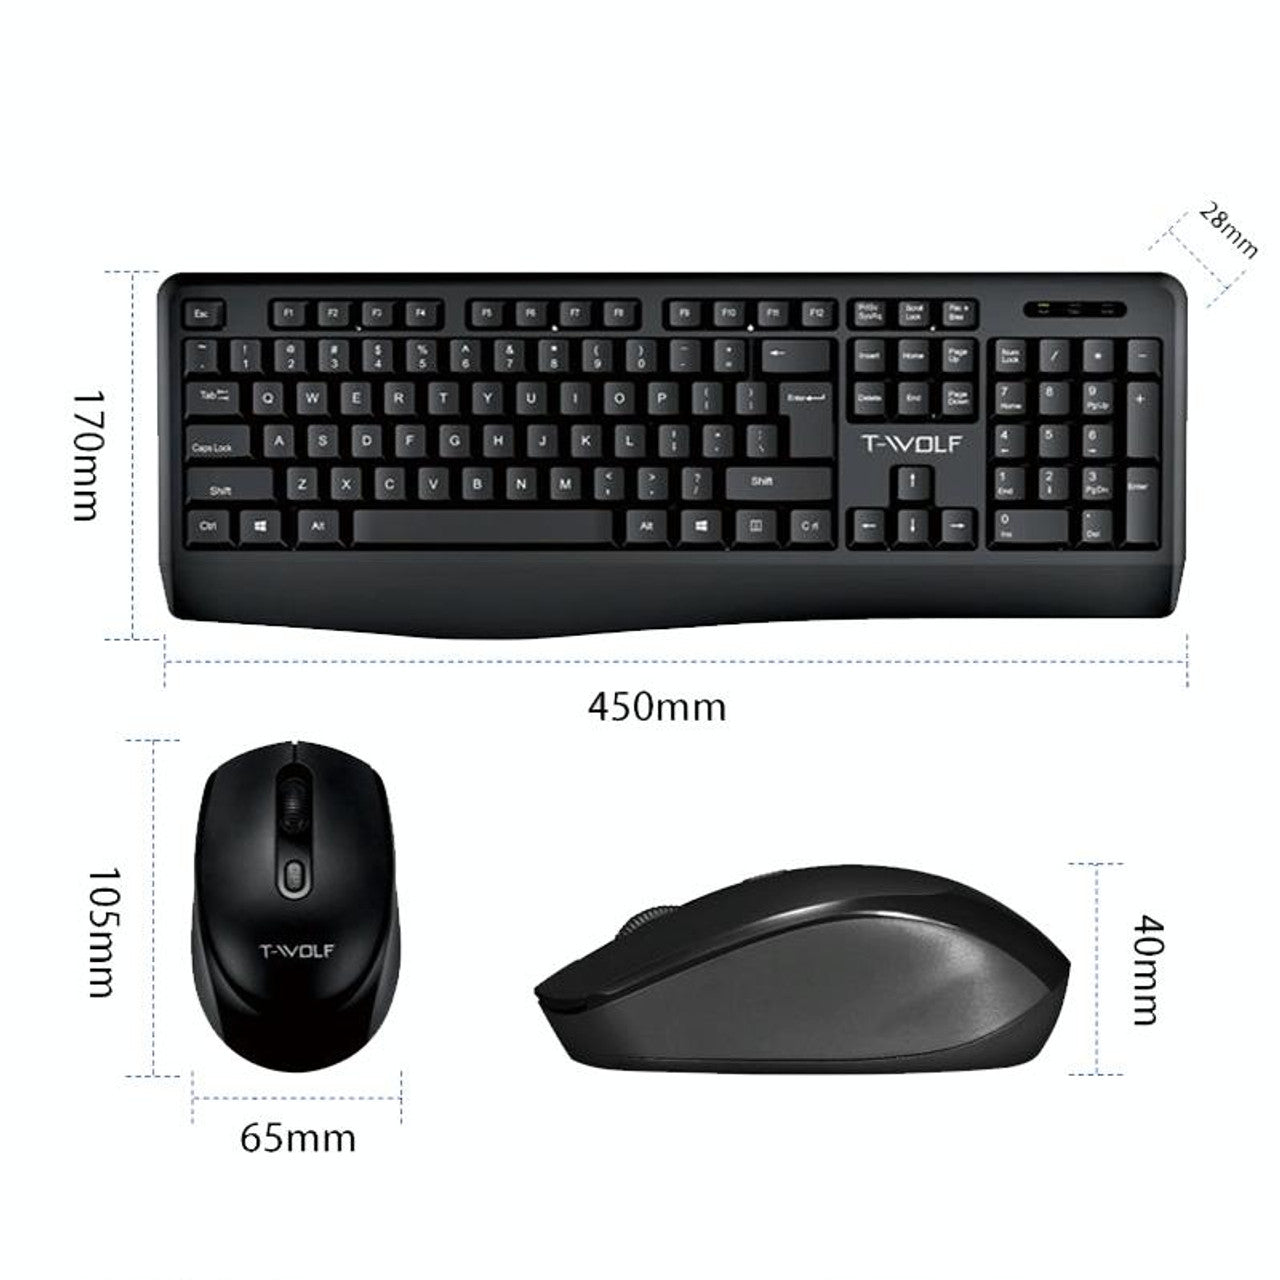 T-WOLF TF-100 2.4G Bluetooth Laptop Office Wireless Keyboard and Mouse Set